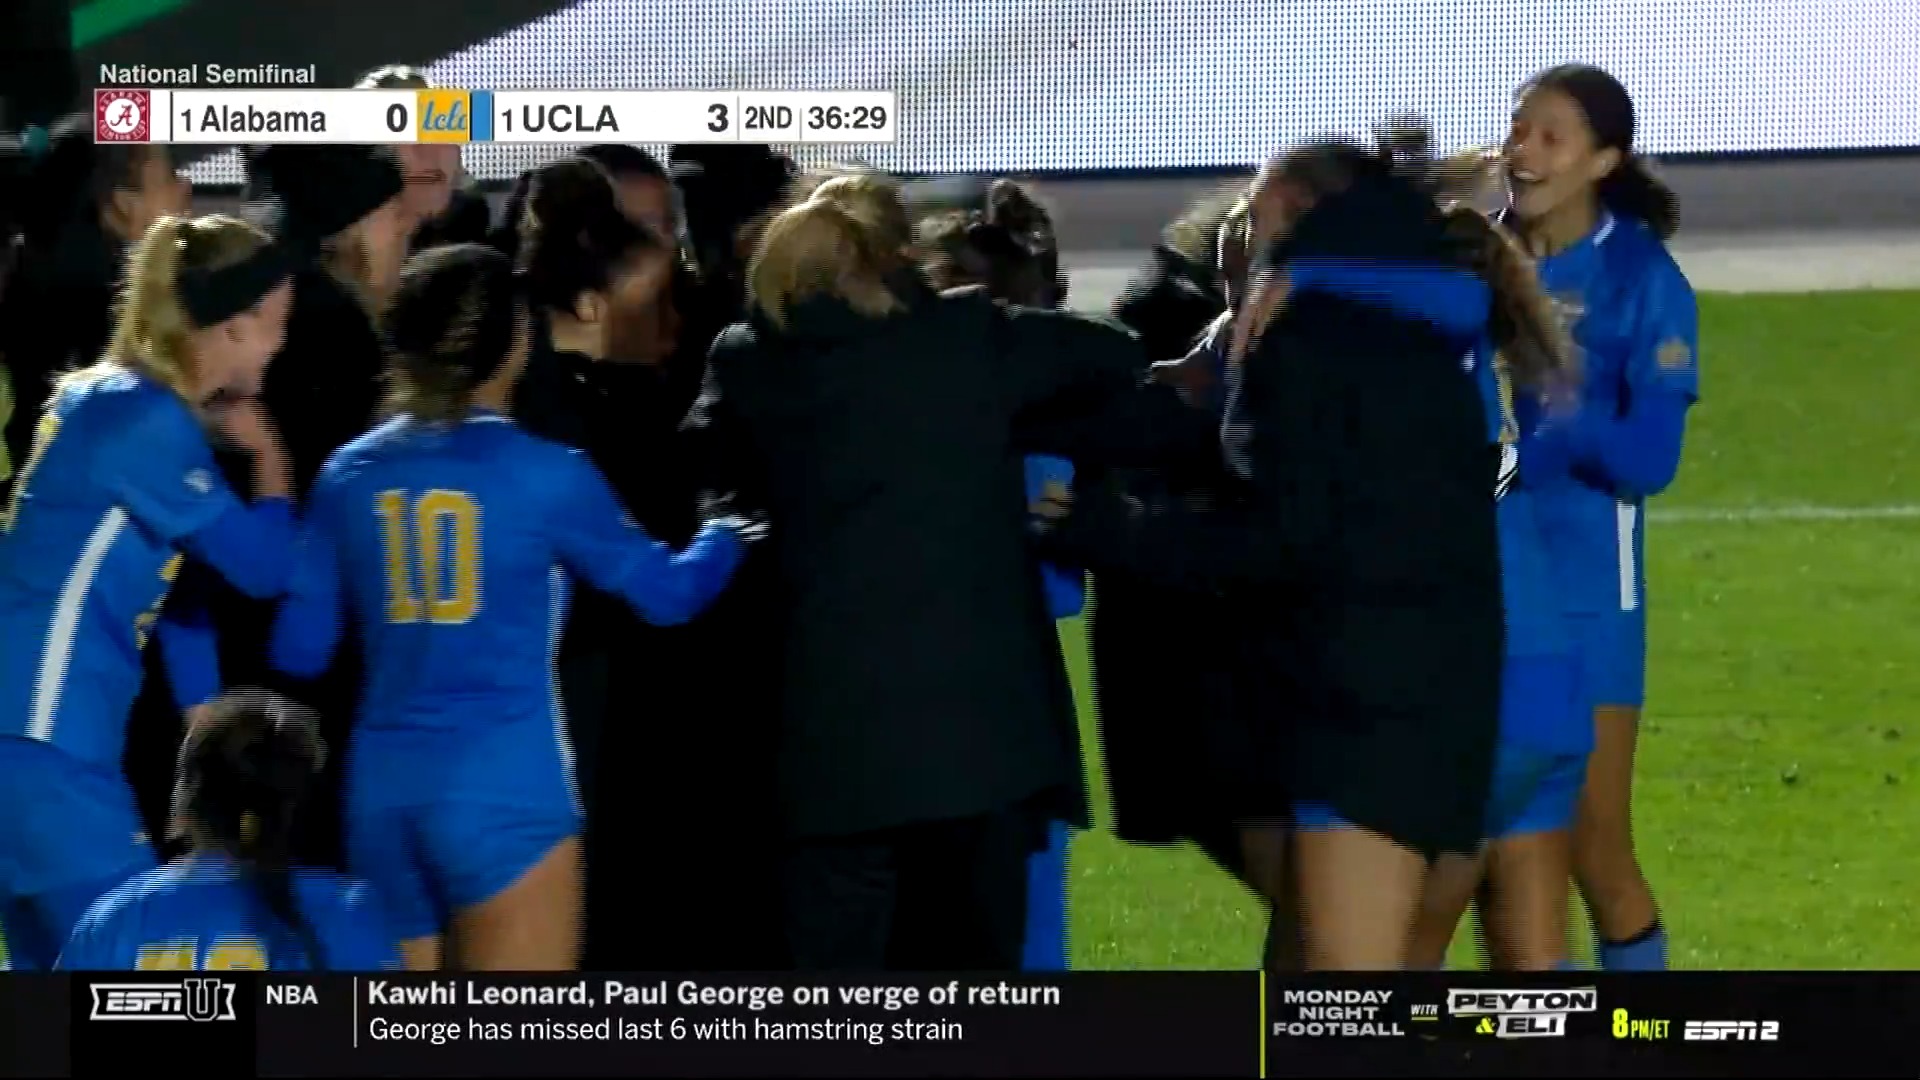 54' I A pair of back-to-back goals extends the Bruins lead! 

(1) @AlabamaSoccer - 0 
🆚
(1) @UCLAWSoccer - 3

📺 ESPNU 

#WCollegeCup”